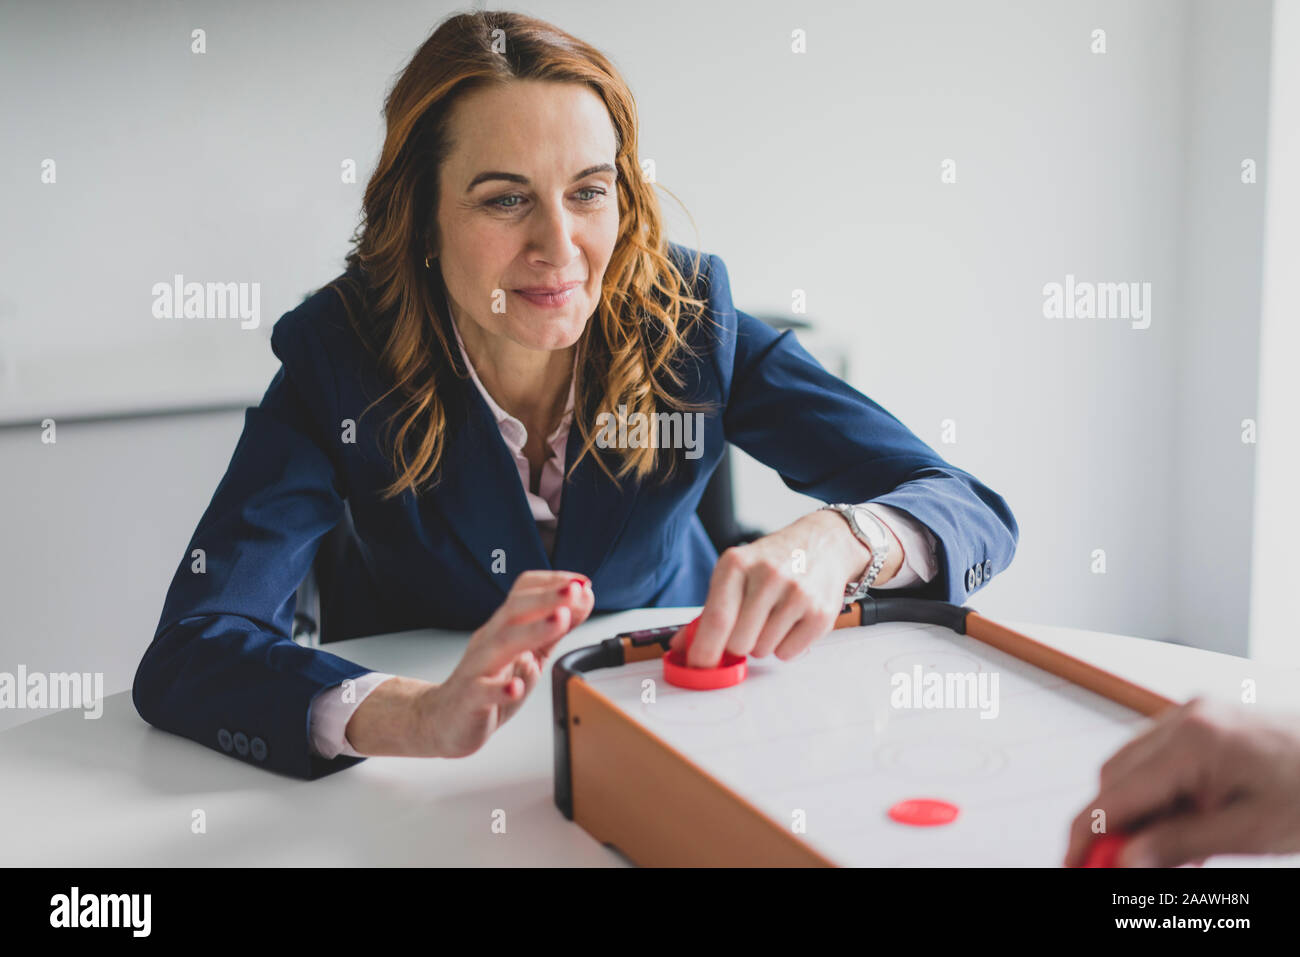 Businesswoman playing air hockey in office Stock Photo